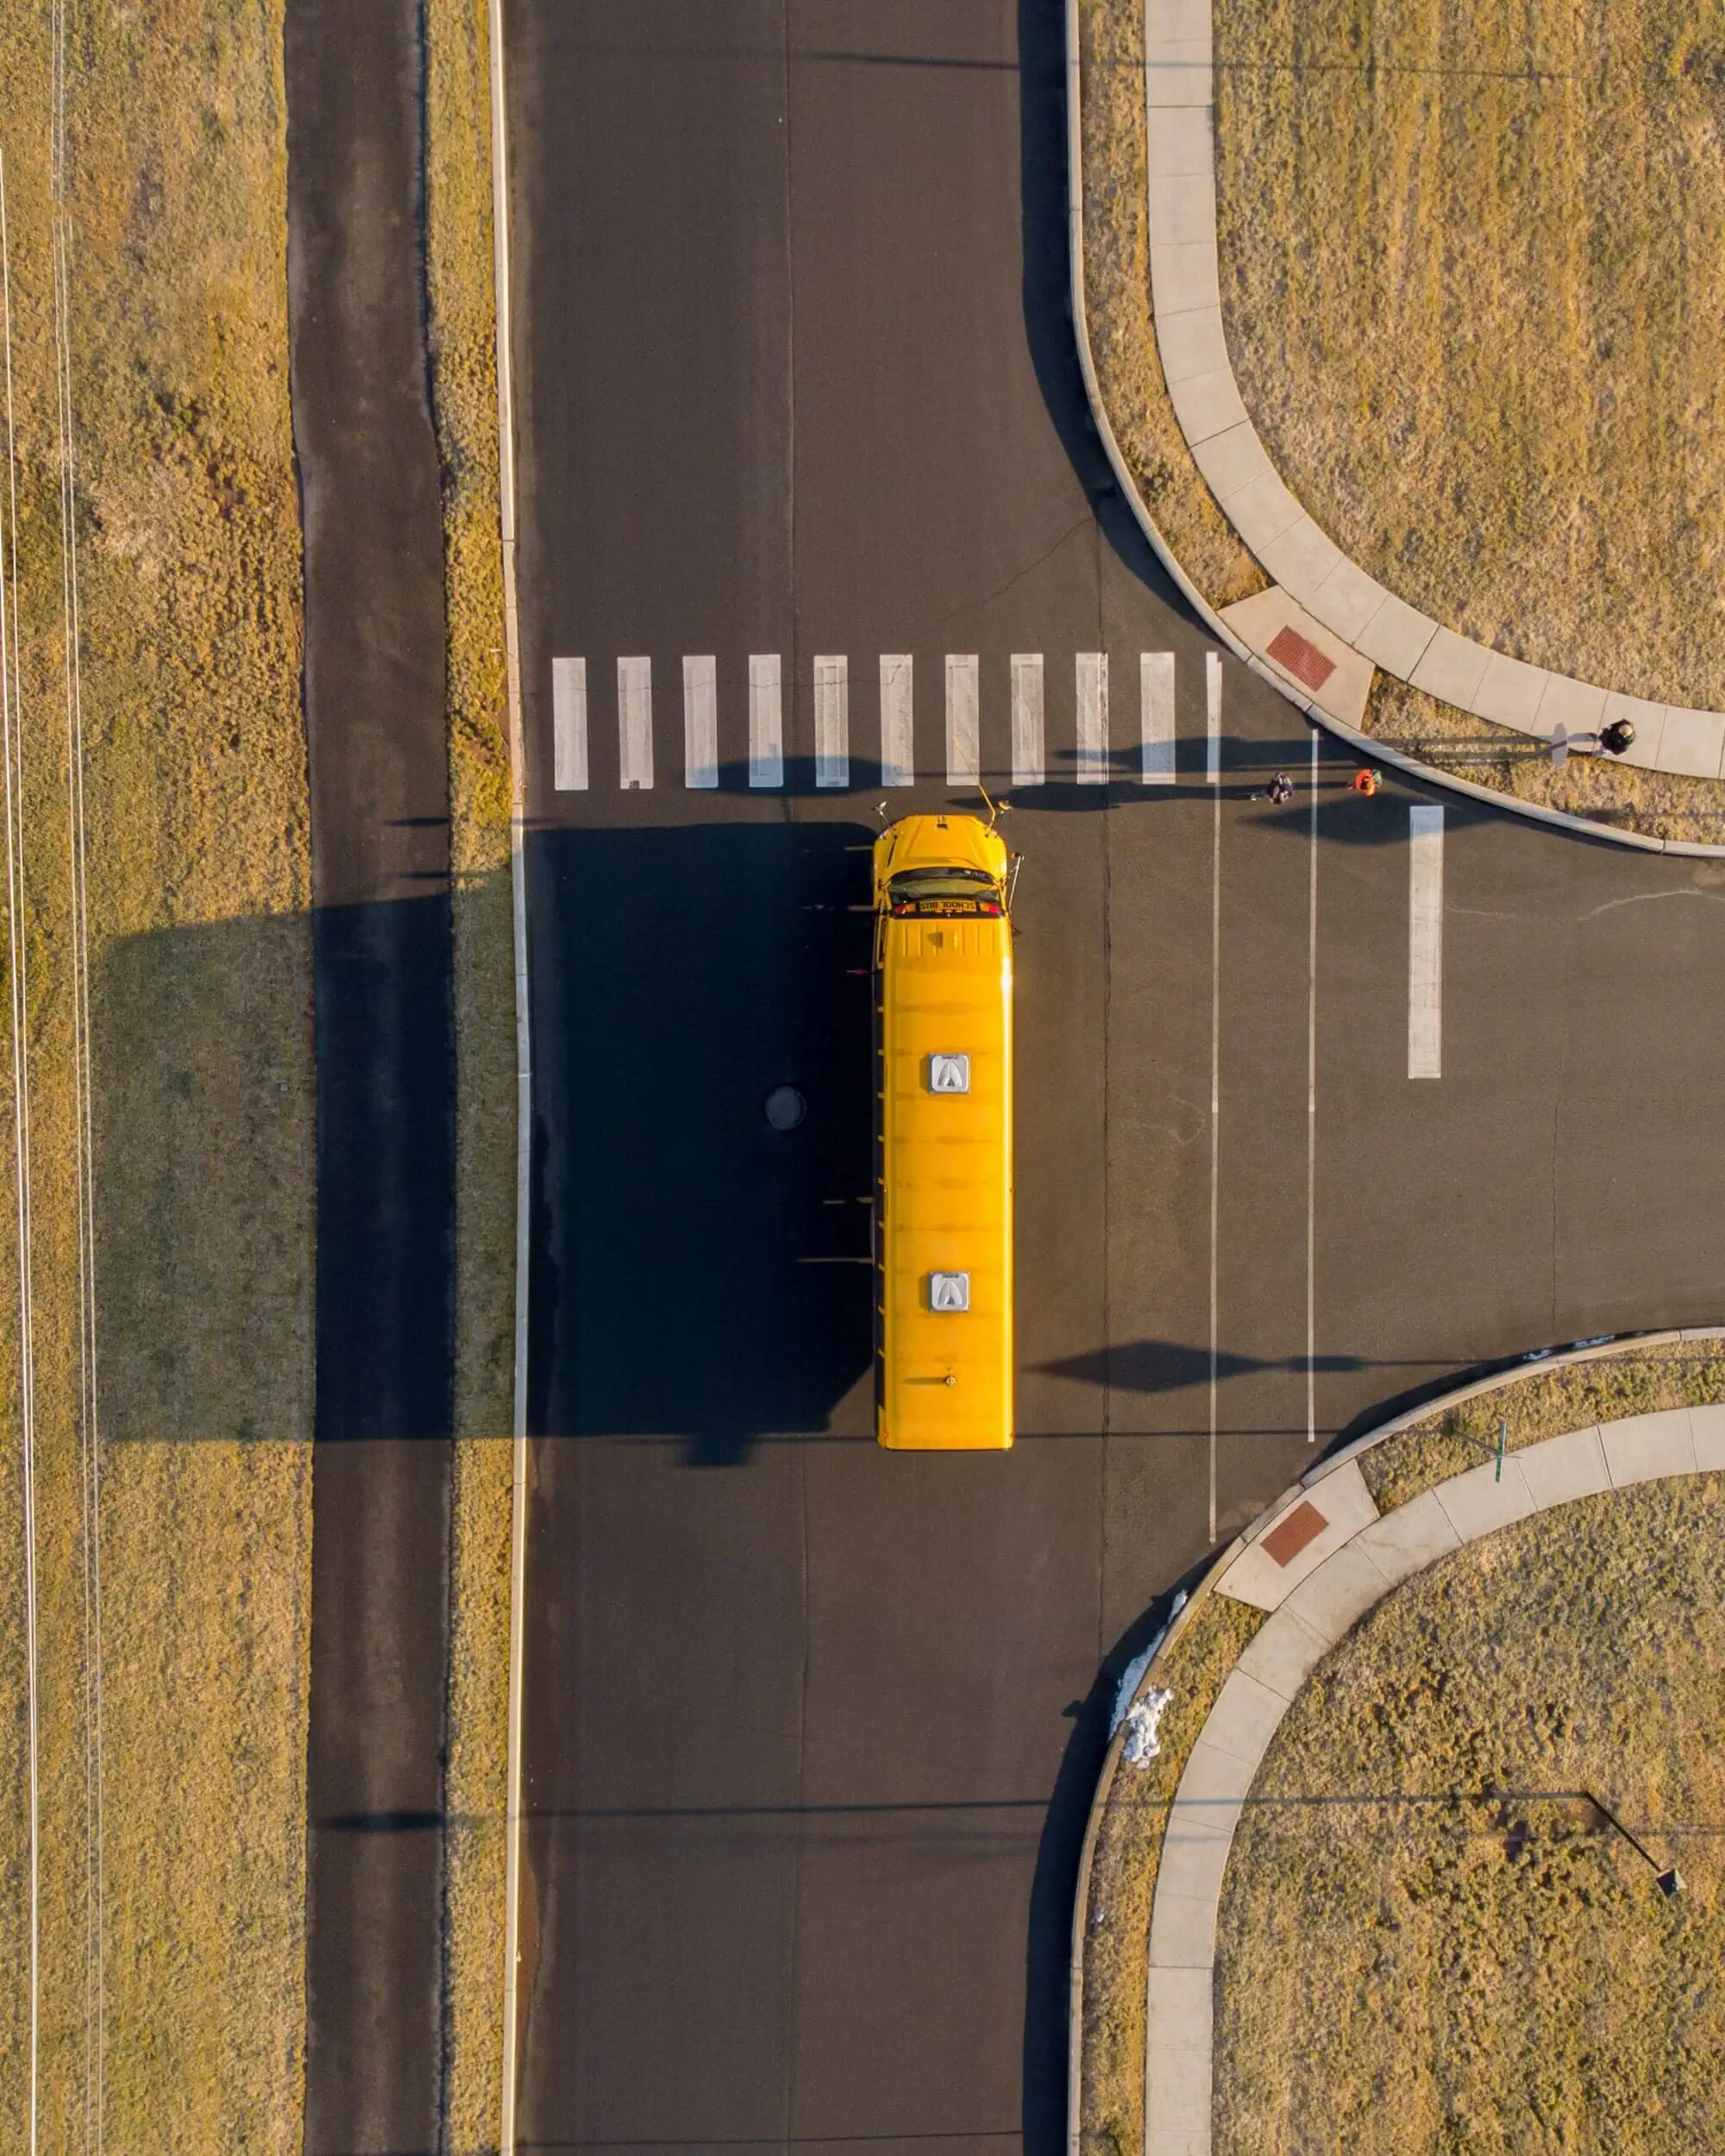 Overhead shot of school bus in route to destination, equipped with GPS tracking system